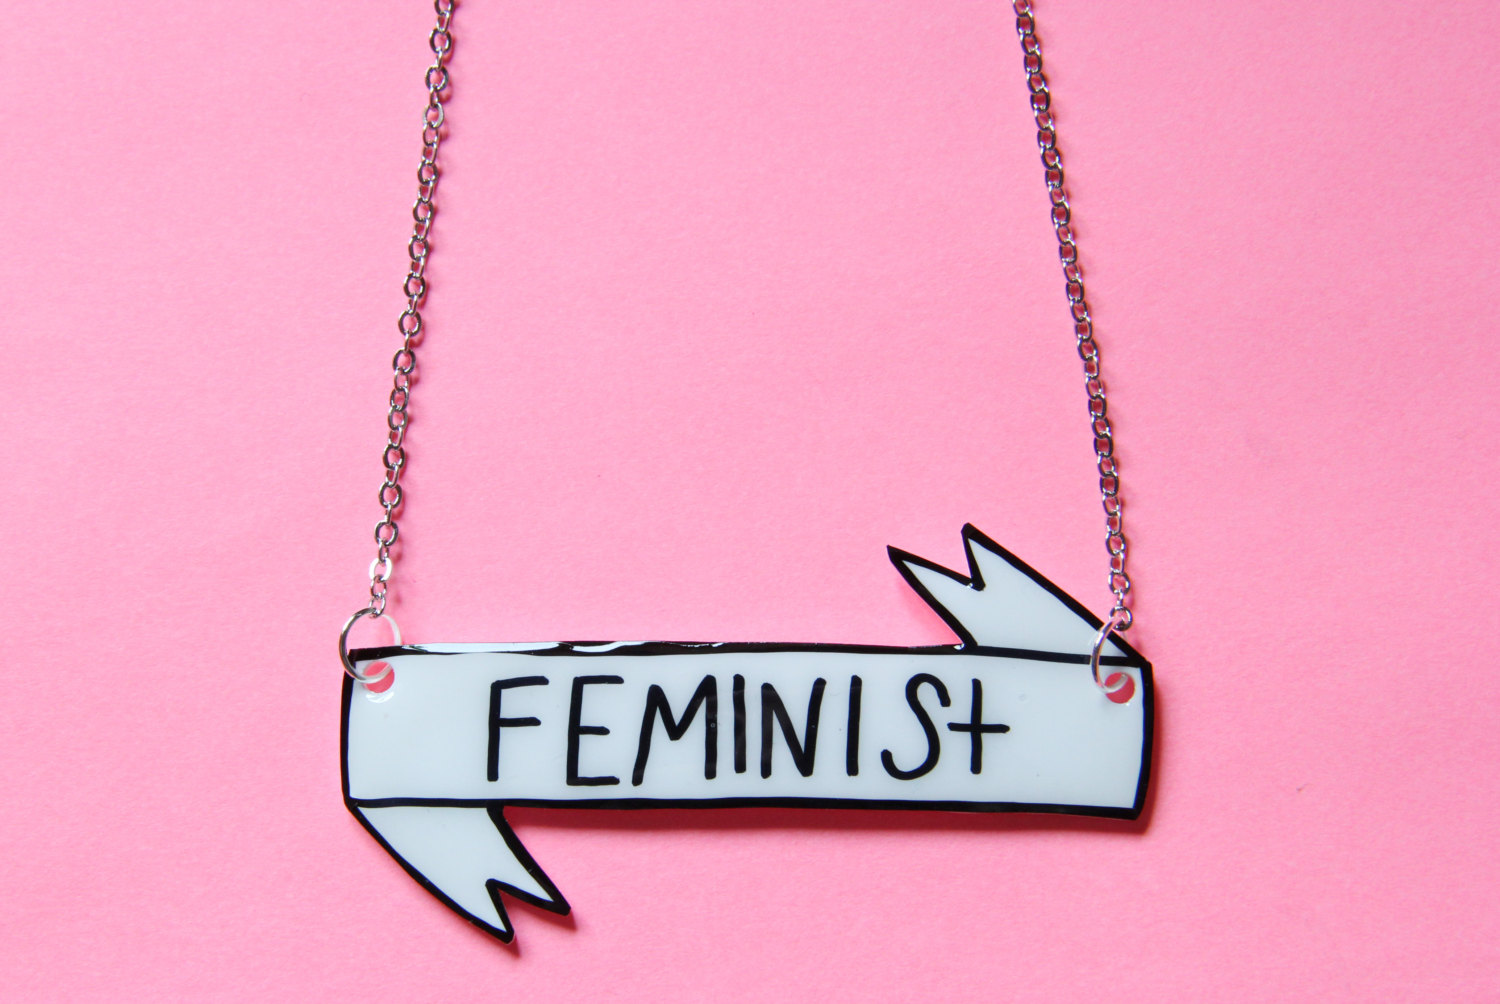 13 Feminist Decor Ideas You Need In Your Home And Life Right Now